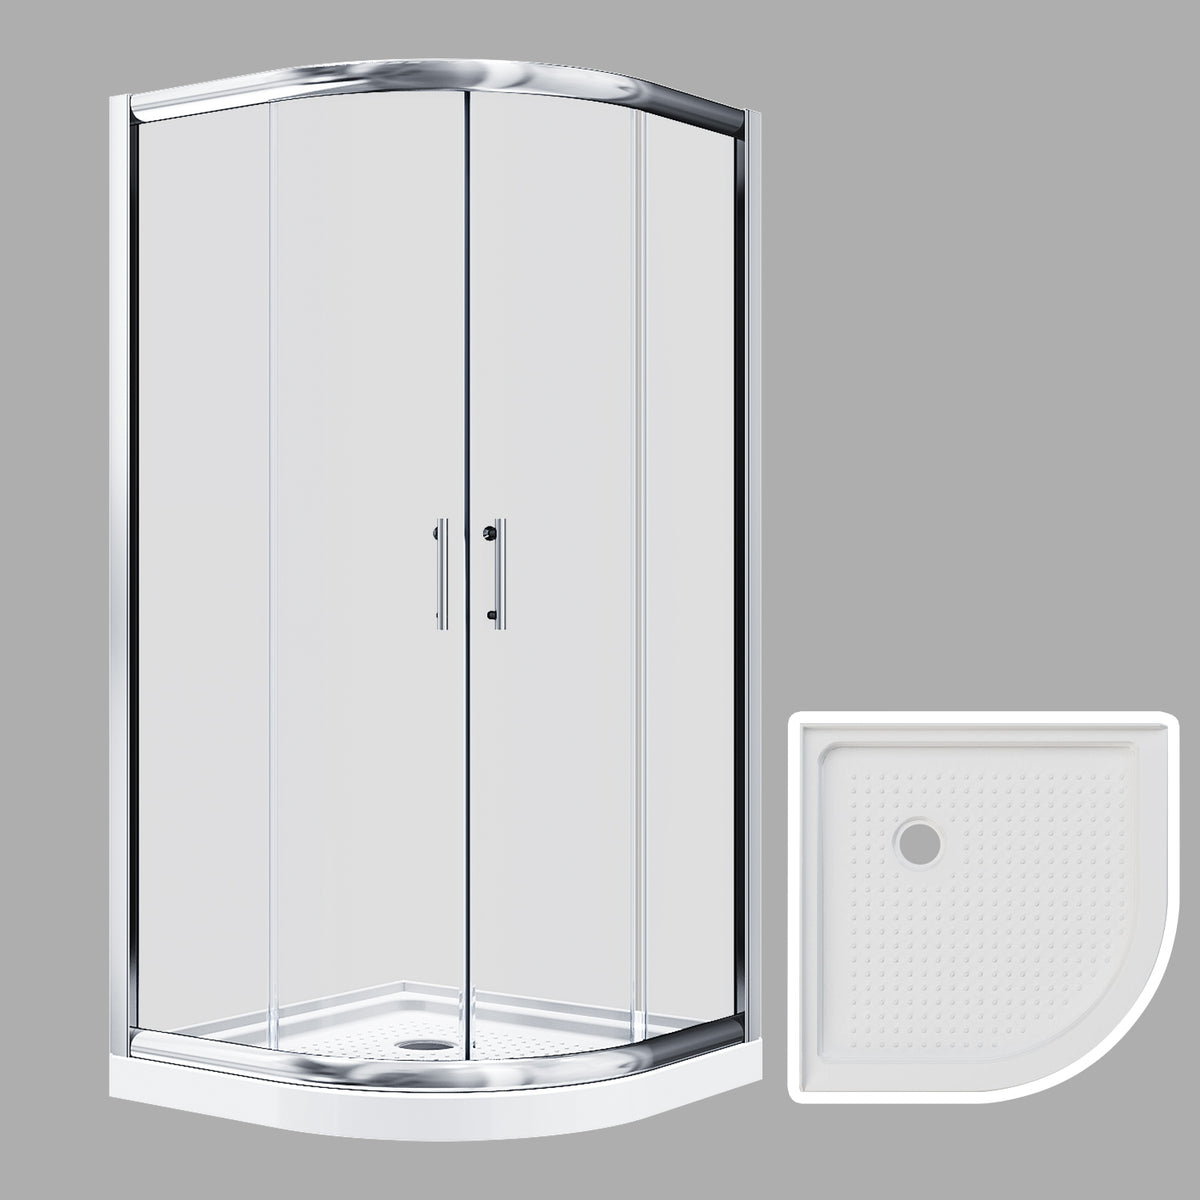 SUNNY SHOWER 37.5 in. D x 37.5 in. W x 72 in. H Chrome Finish Quadrant Enclosures With Sliding Doors And White Quadrant Base - SUNNY SHOWER